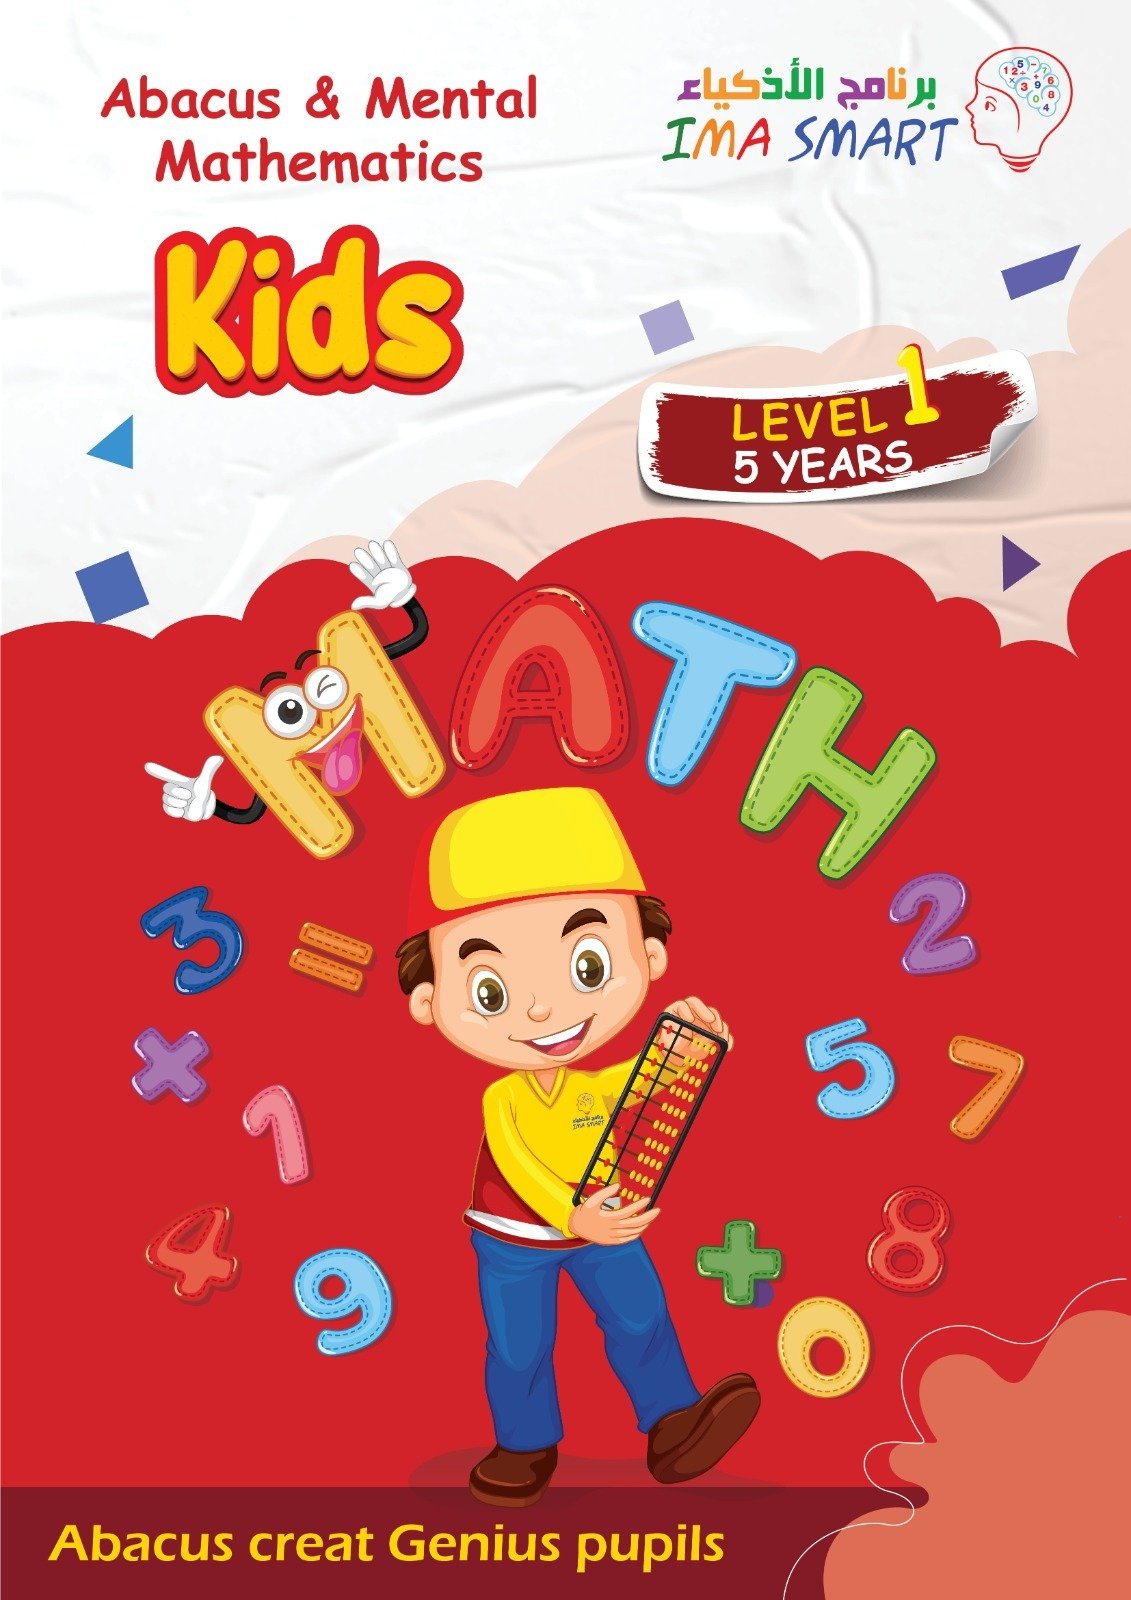 Abacus and Mental Mathematic Level 1  5 years for kids